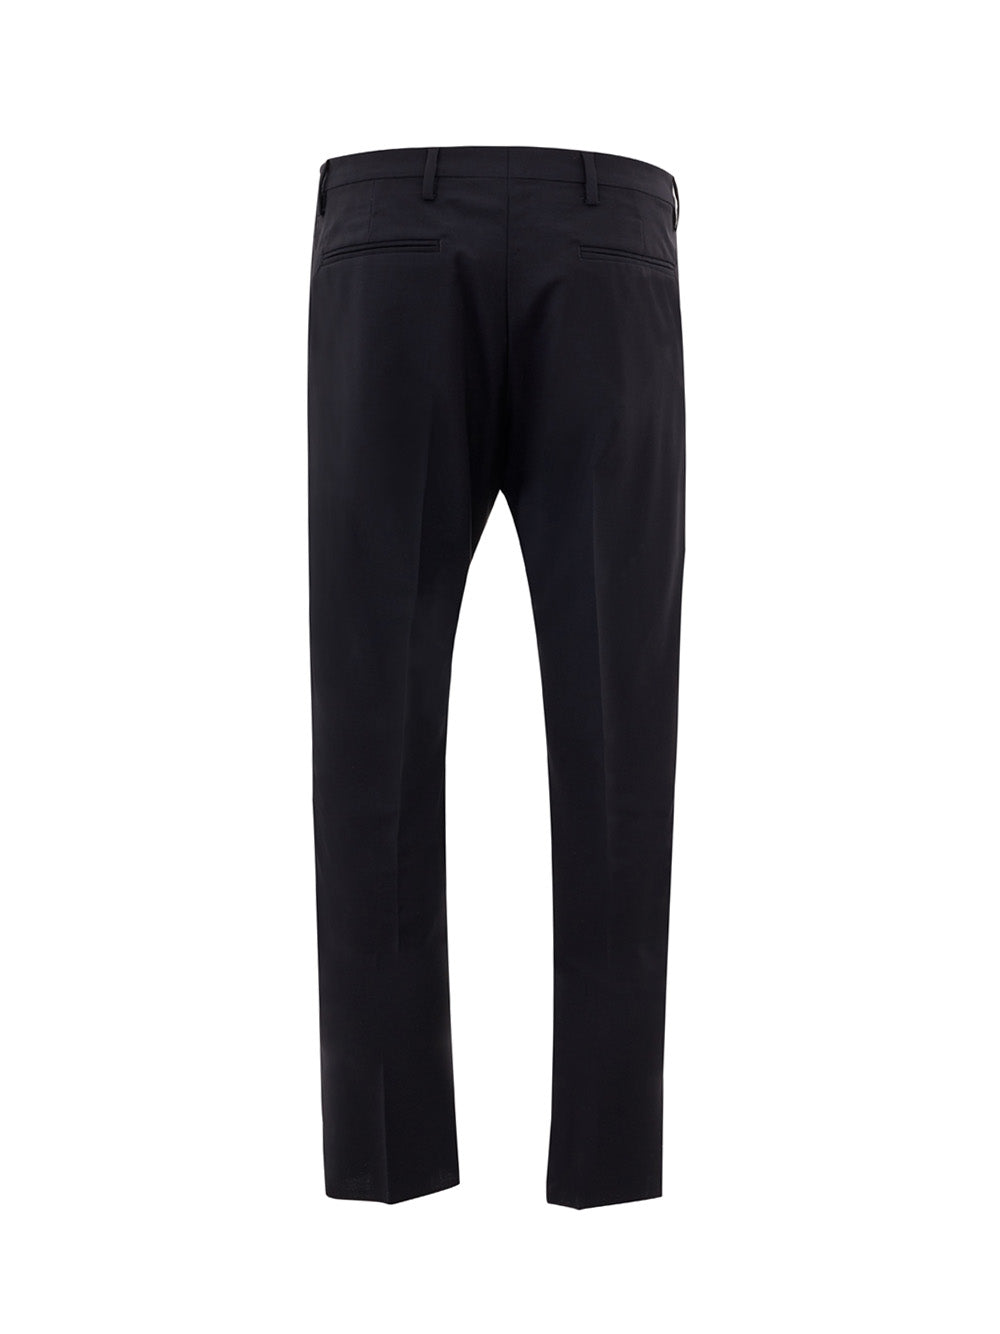 Valentino Tailored Wool Blend Blue Trousers